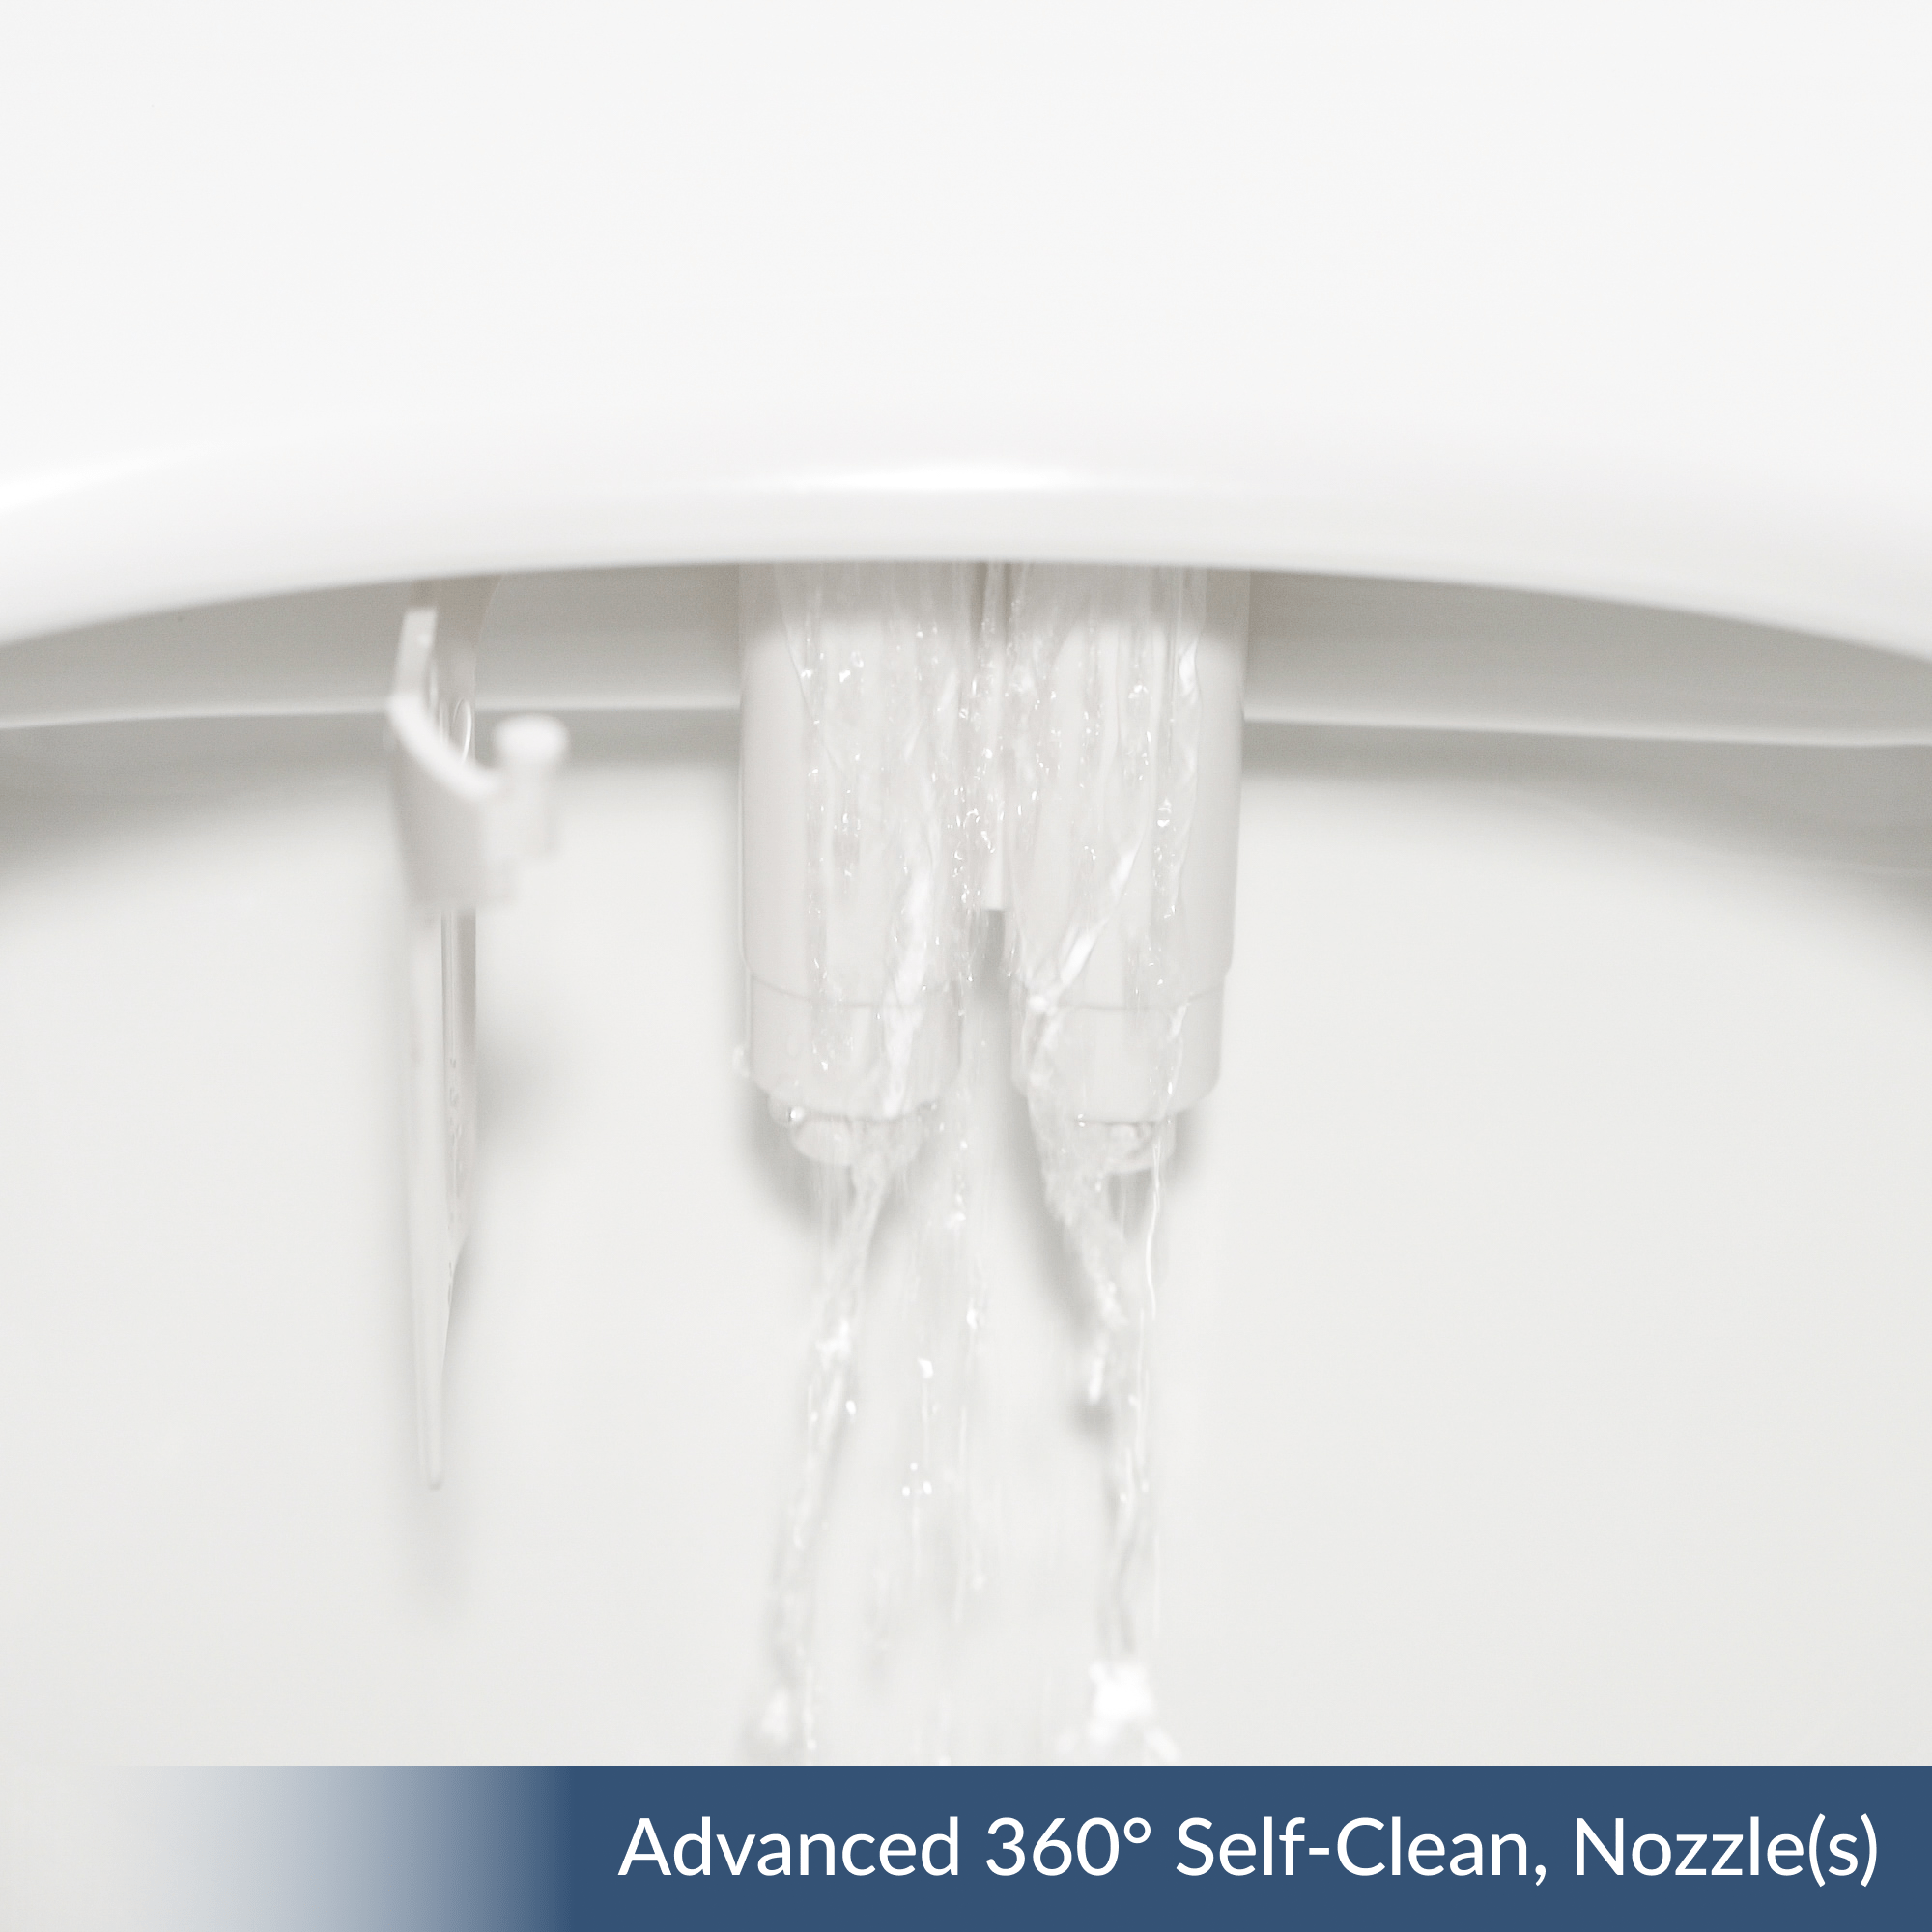 Advanced 360° Self-Clean feature of NEO Plus series runs water down the nozzles to clean them